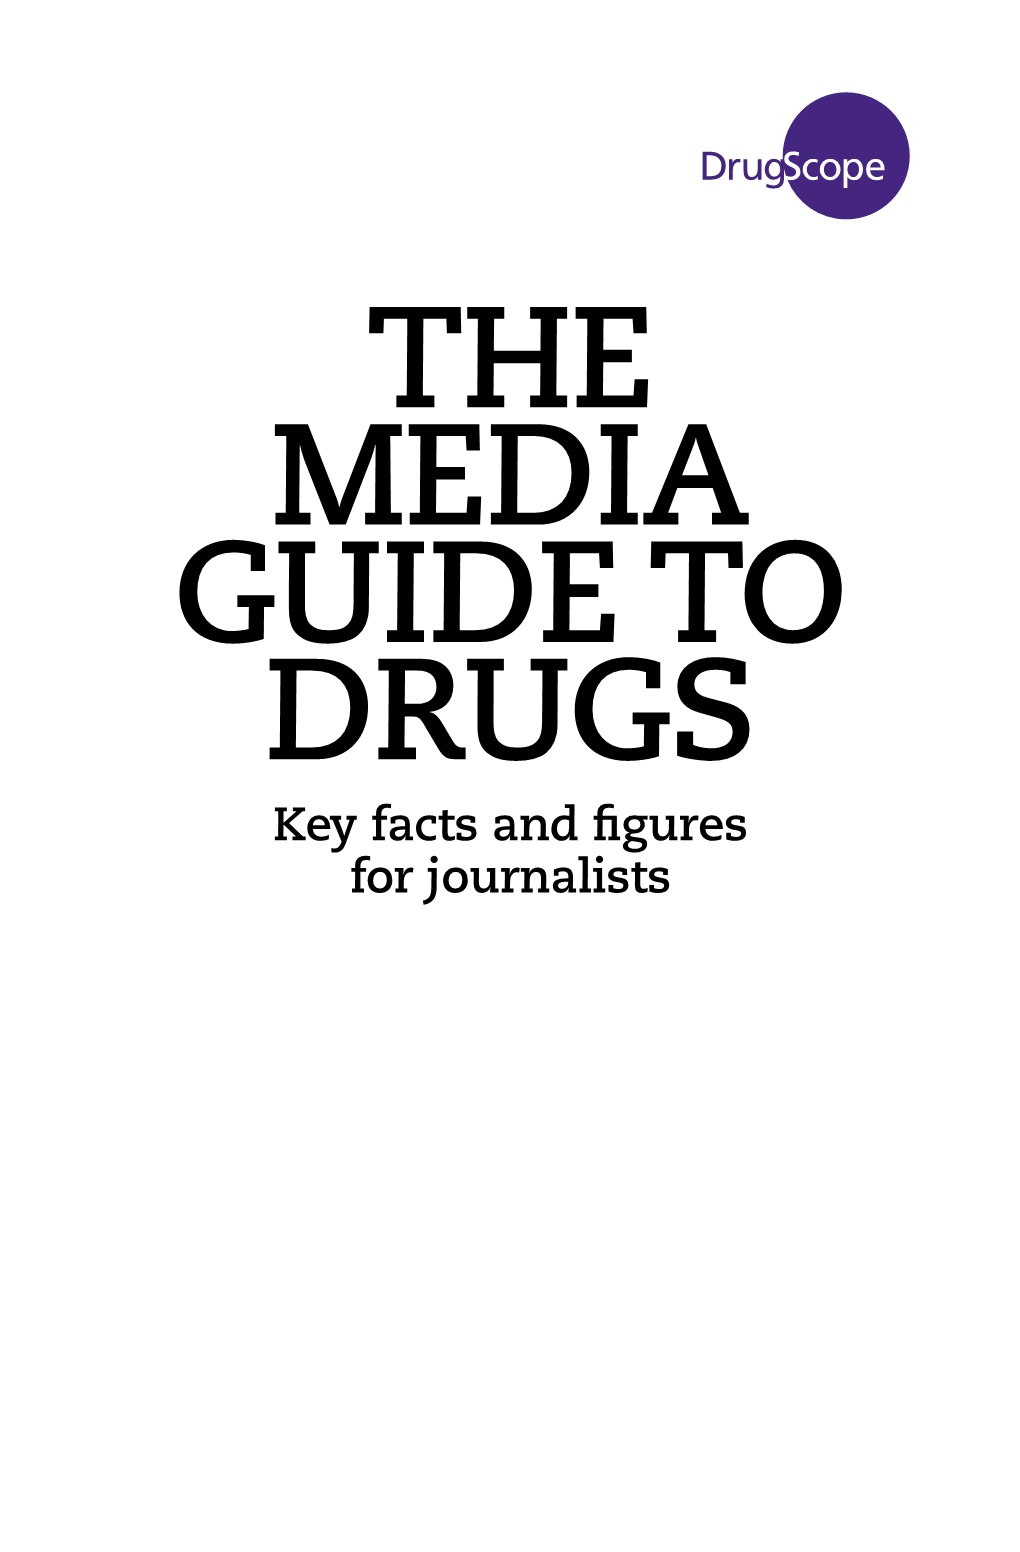 The Media Guide to Drugs Key Facts and Figures for Journalists Published By: Drugscope Asra House 1 Long Lane London SE1 4PG